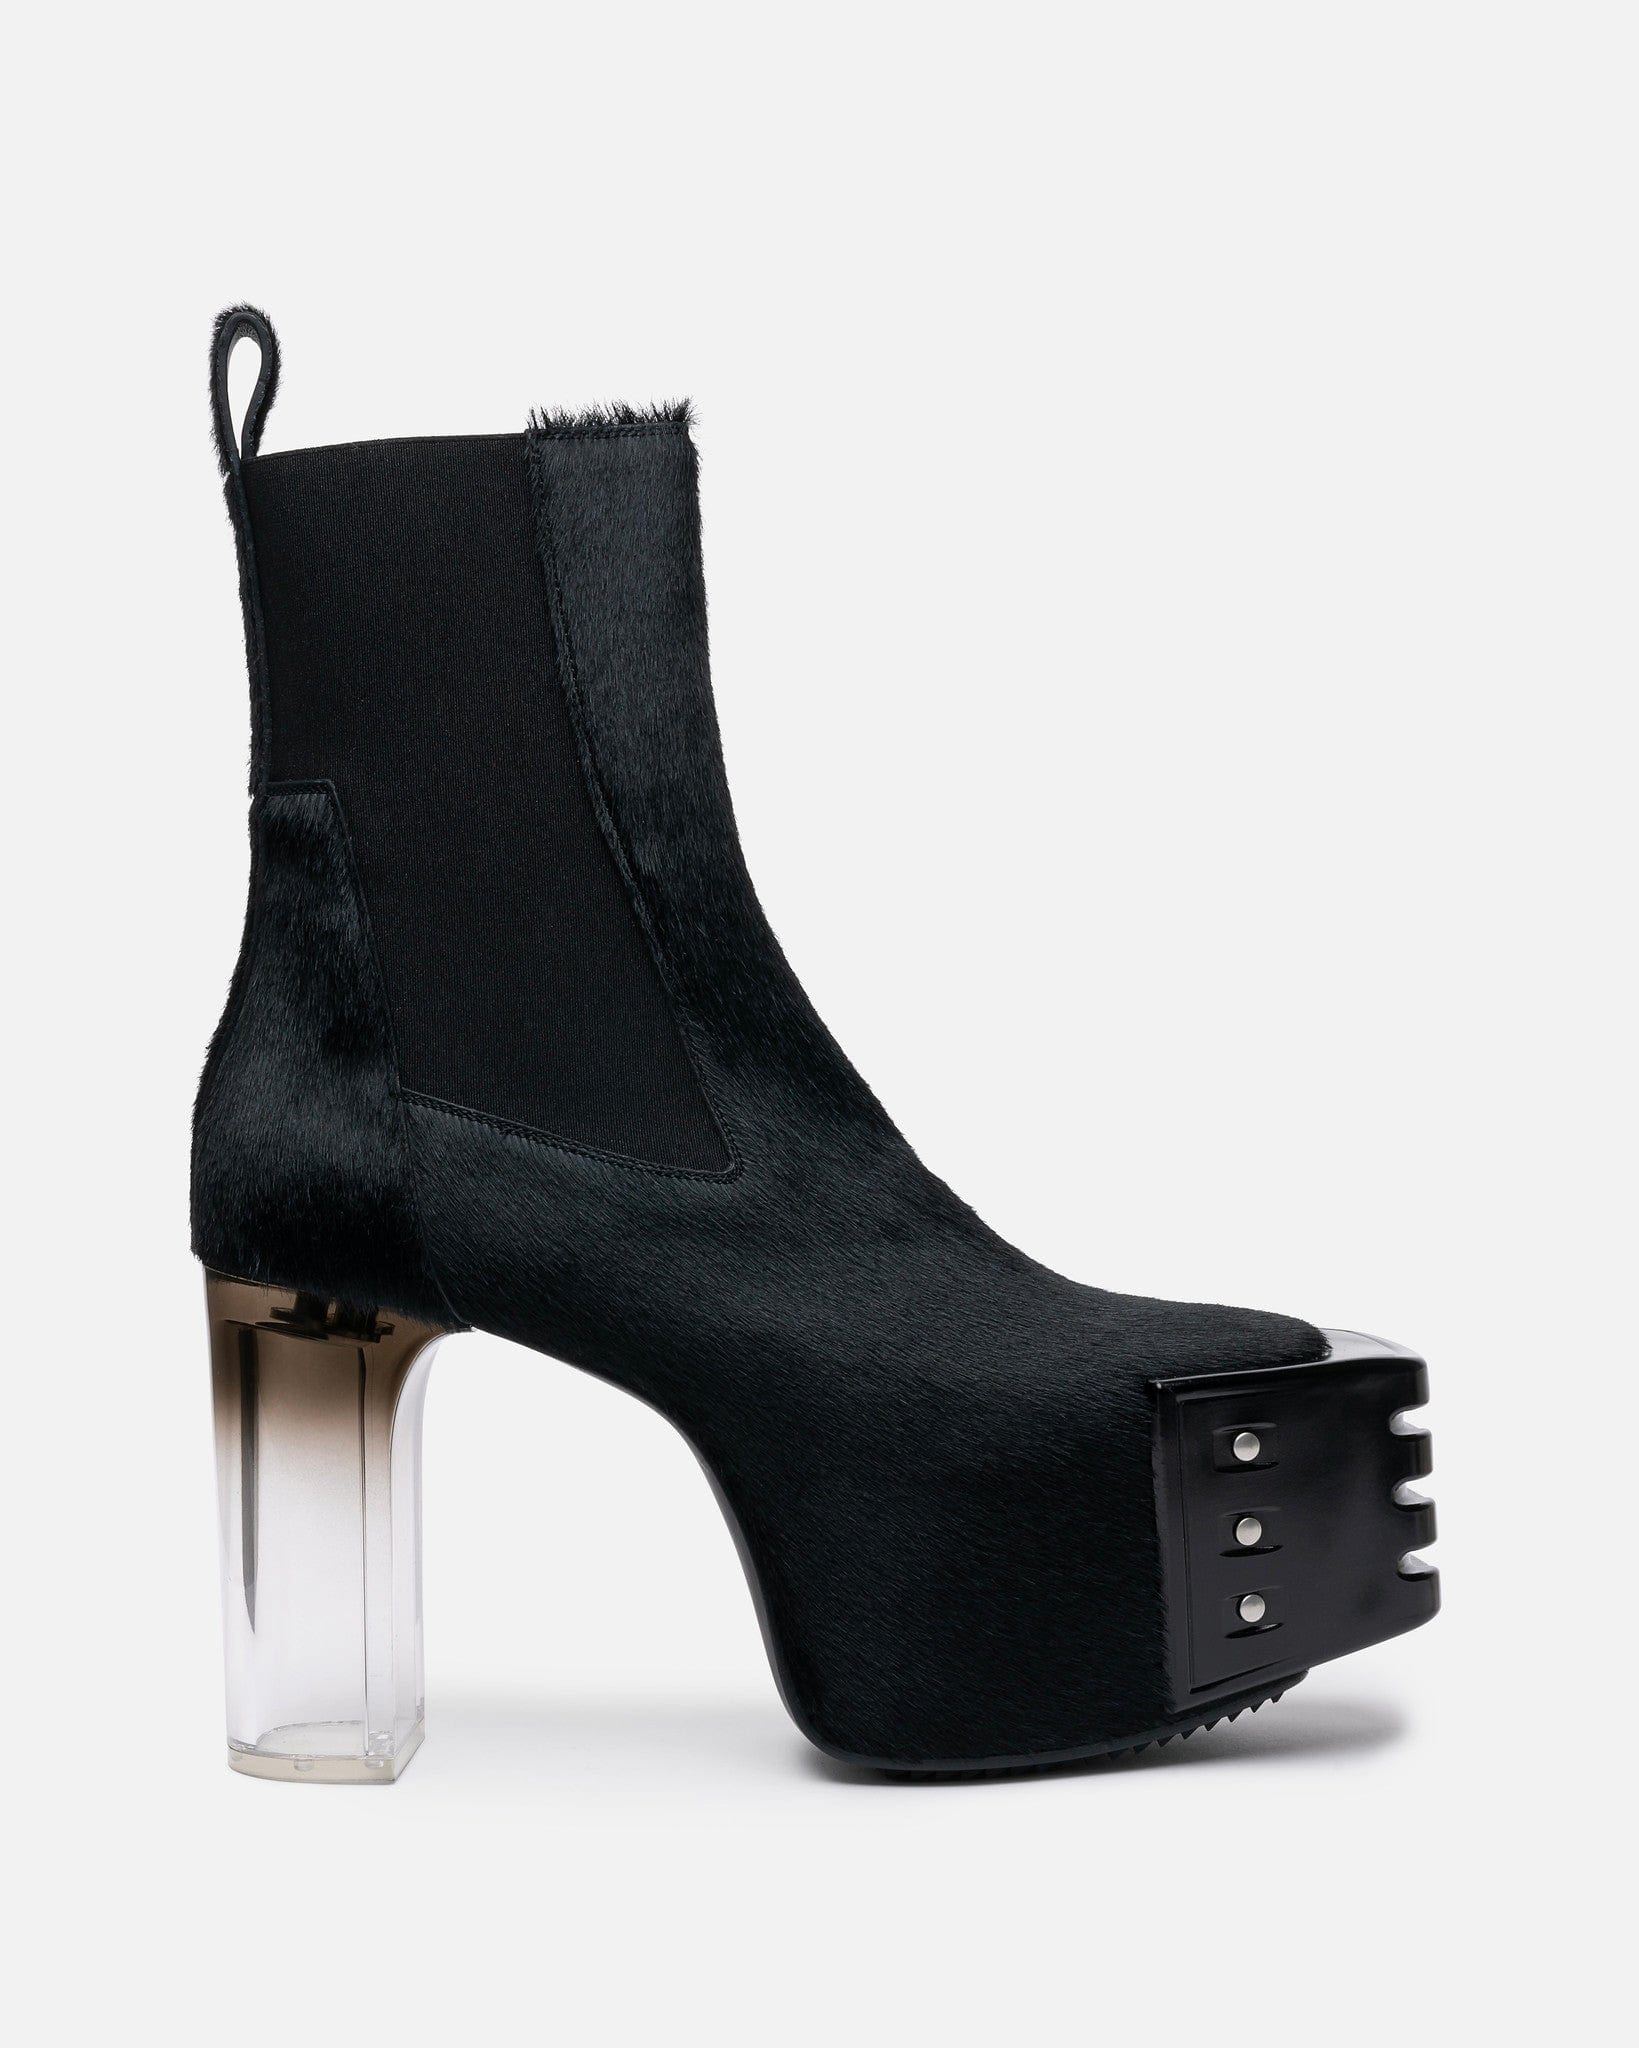 Grilled Kiss Boots in Black/Clear